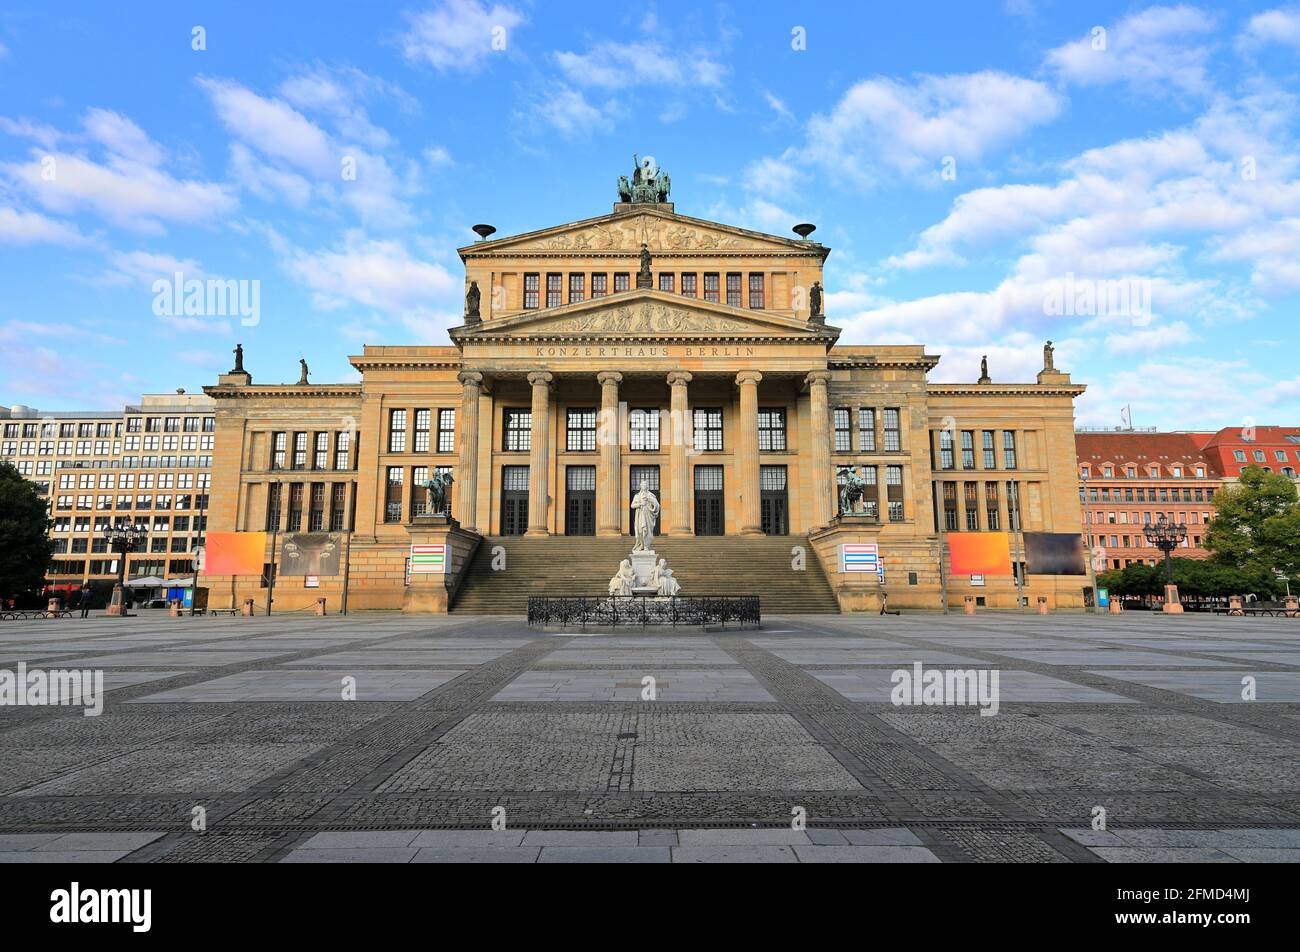 Concert Hall in Berlin. Germany, Europe. Stock Photo